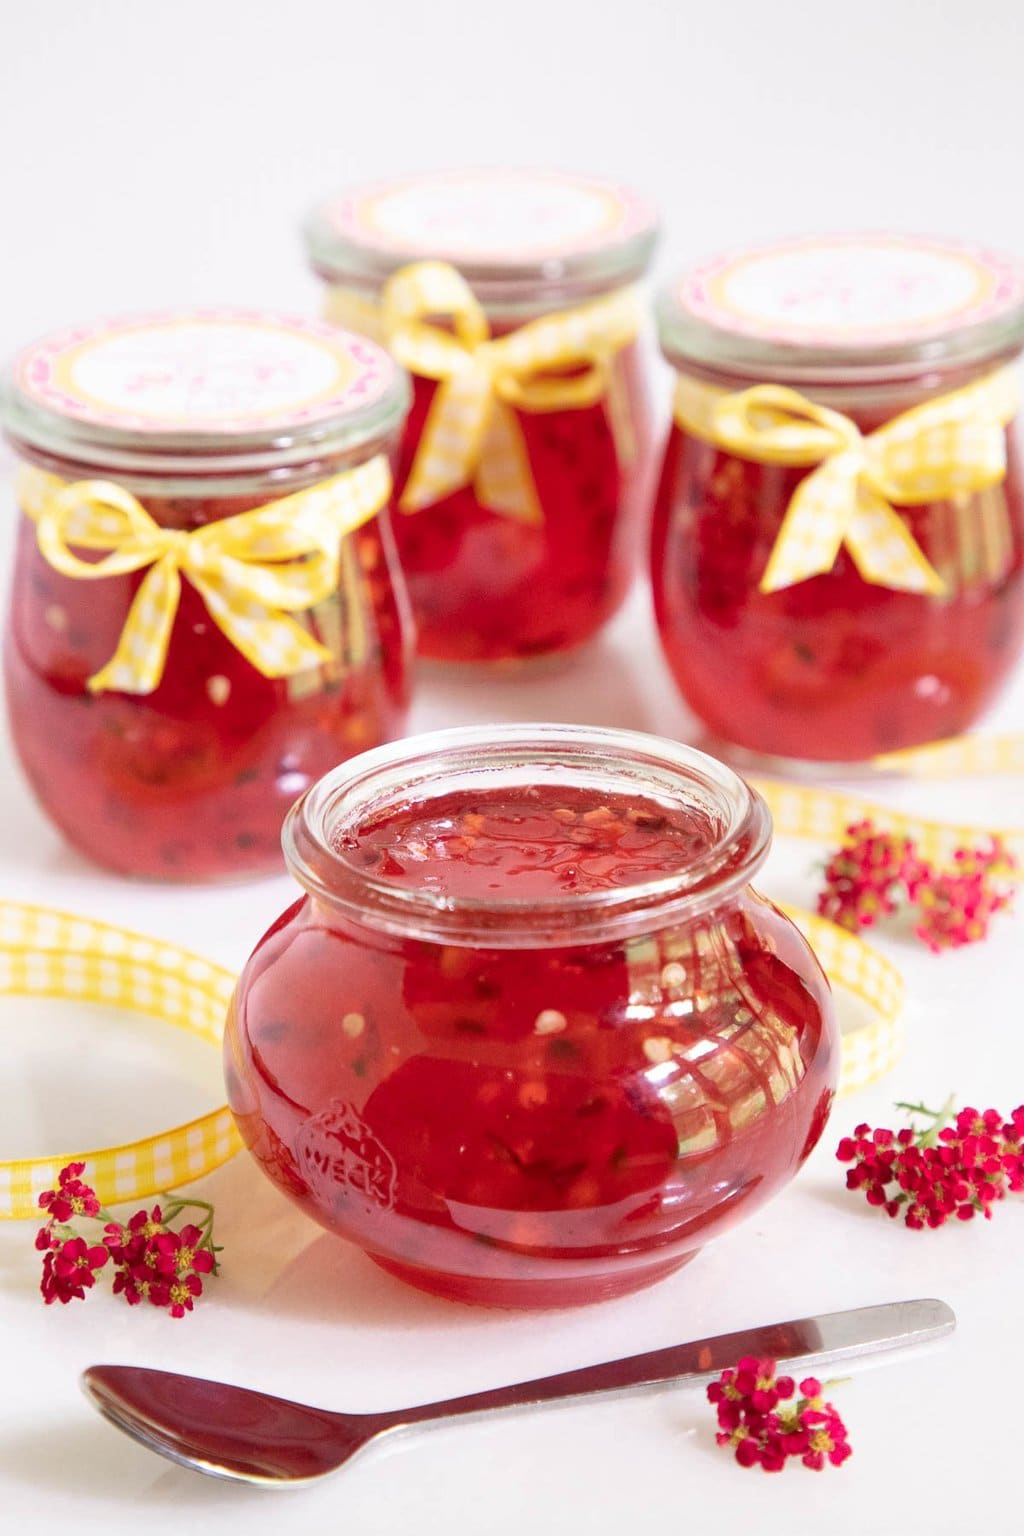 Vertical photo of glass Weck jars of Plum Ginger Pepper Jelly decorated with yellow and white checked ribbons and custom jelly labels.